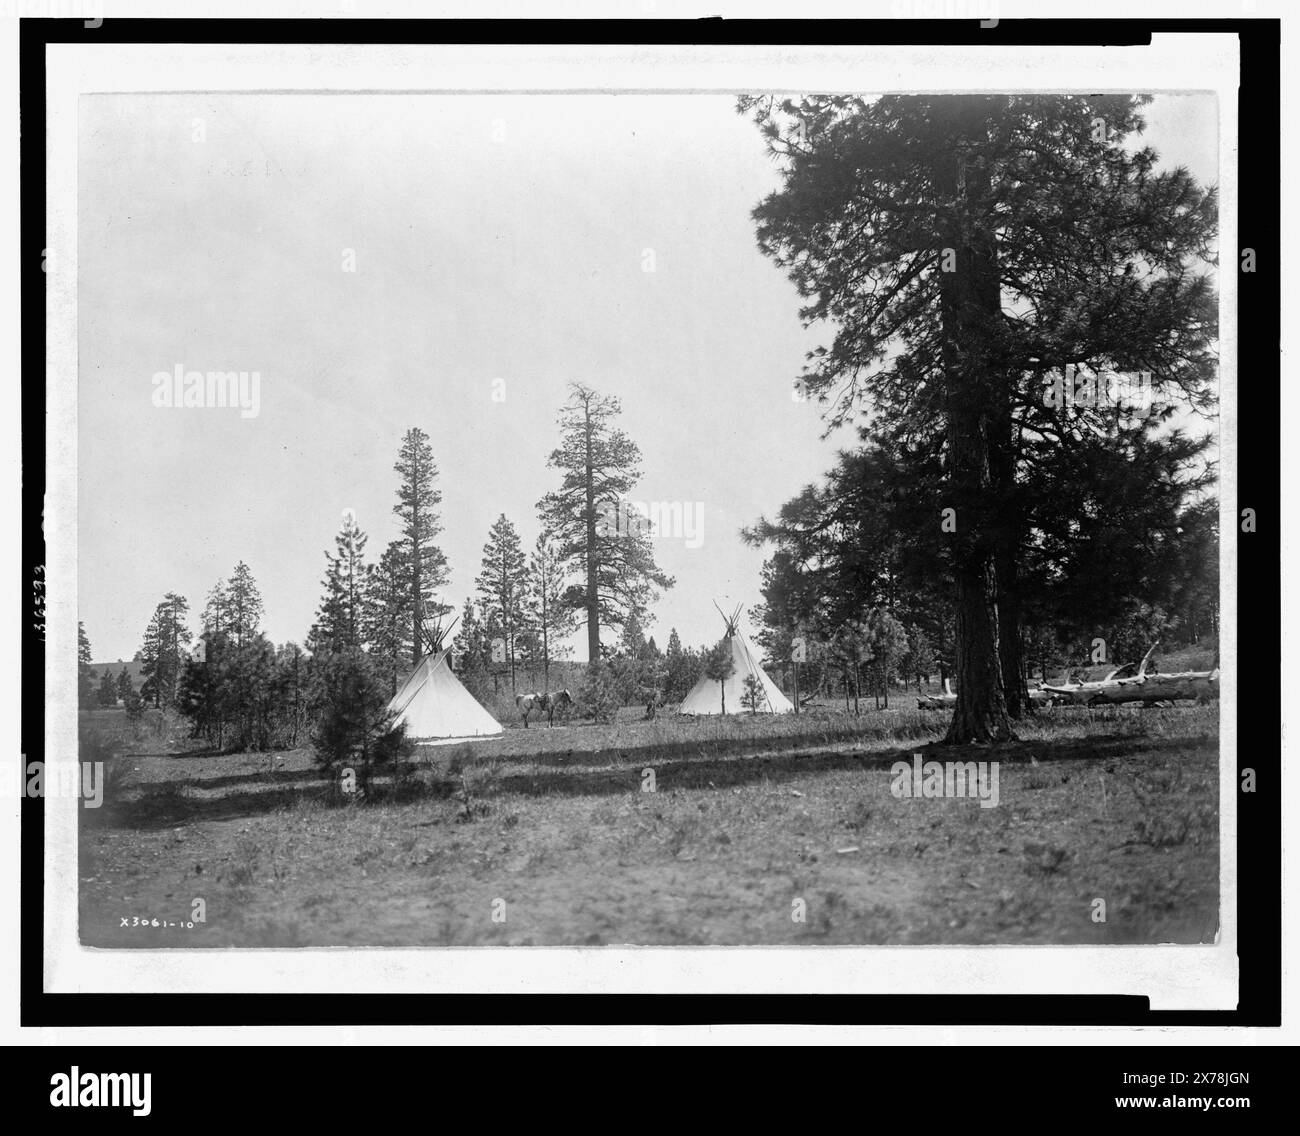 A mountain camp Yakima, Title from item., Curtis no. 3061-10., Forms part of: Edward S. Curtis Collection ., Published in: The North American Indian / Edward S. Curtis. [Seattle, Wash.] : Edward S. Curtis, 1907-30, Suppl. v. 7, pl. 224.. Indians of North America, 1910. , Yakama Indians, 1910. , Tipis, 1910. Stock Photo